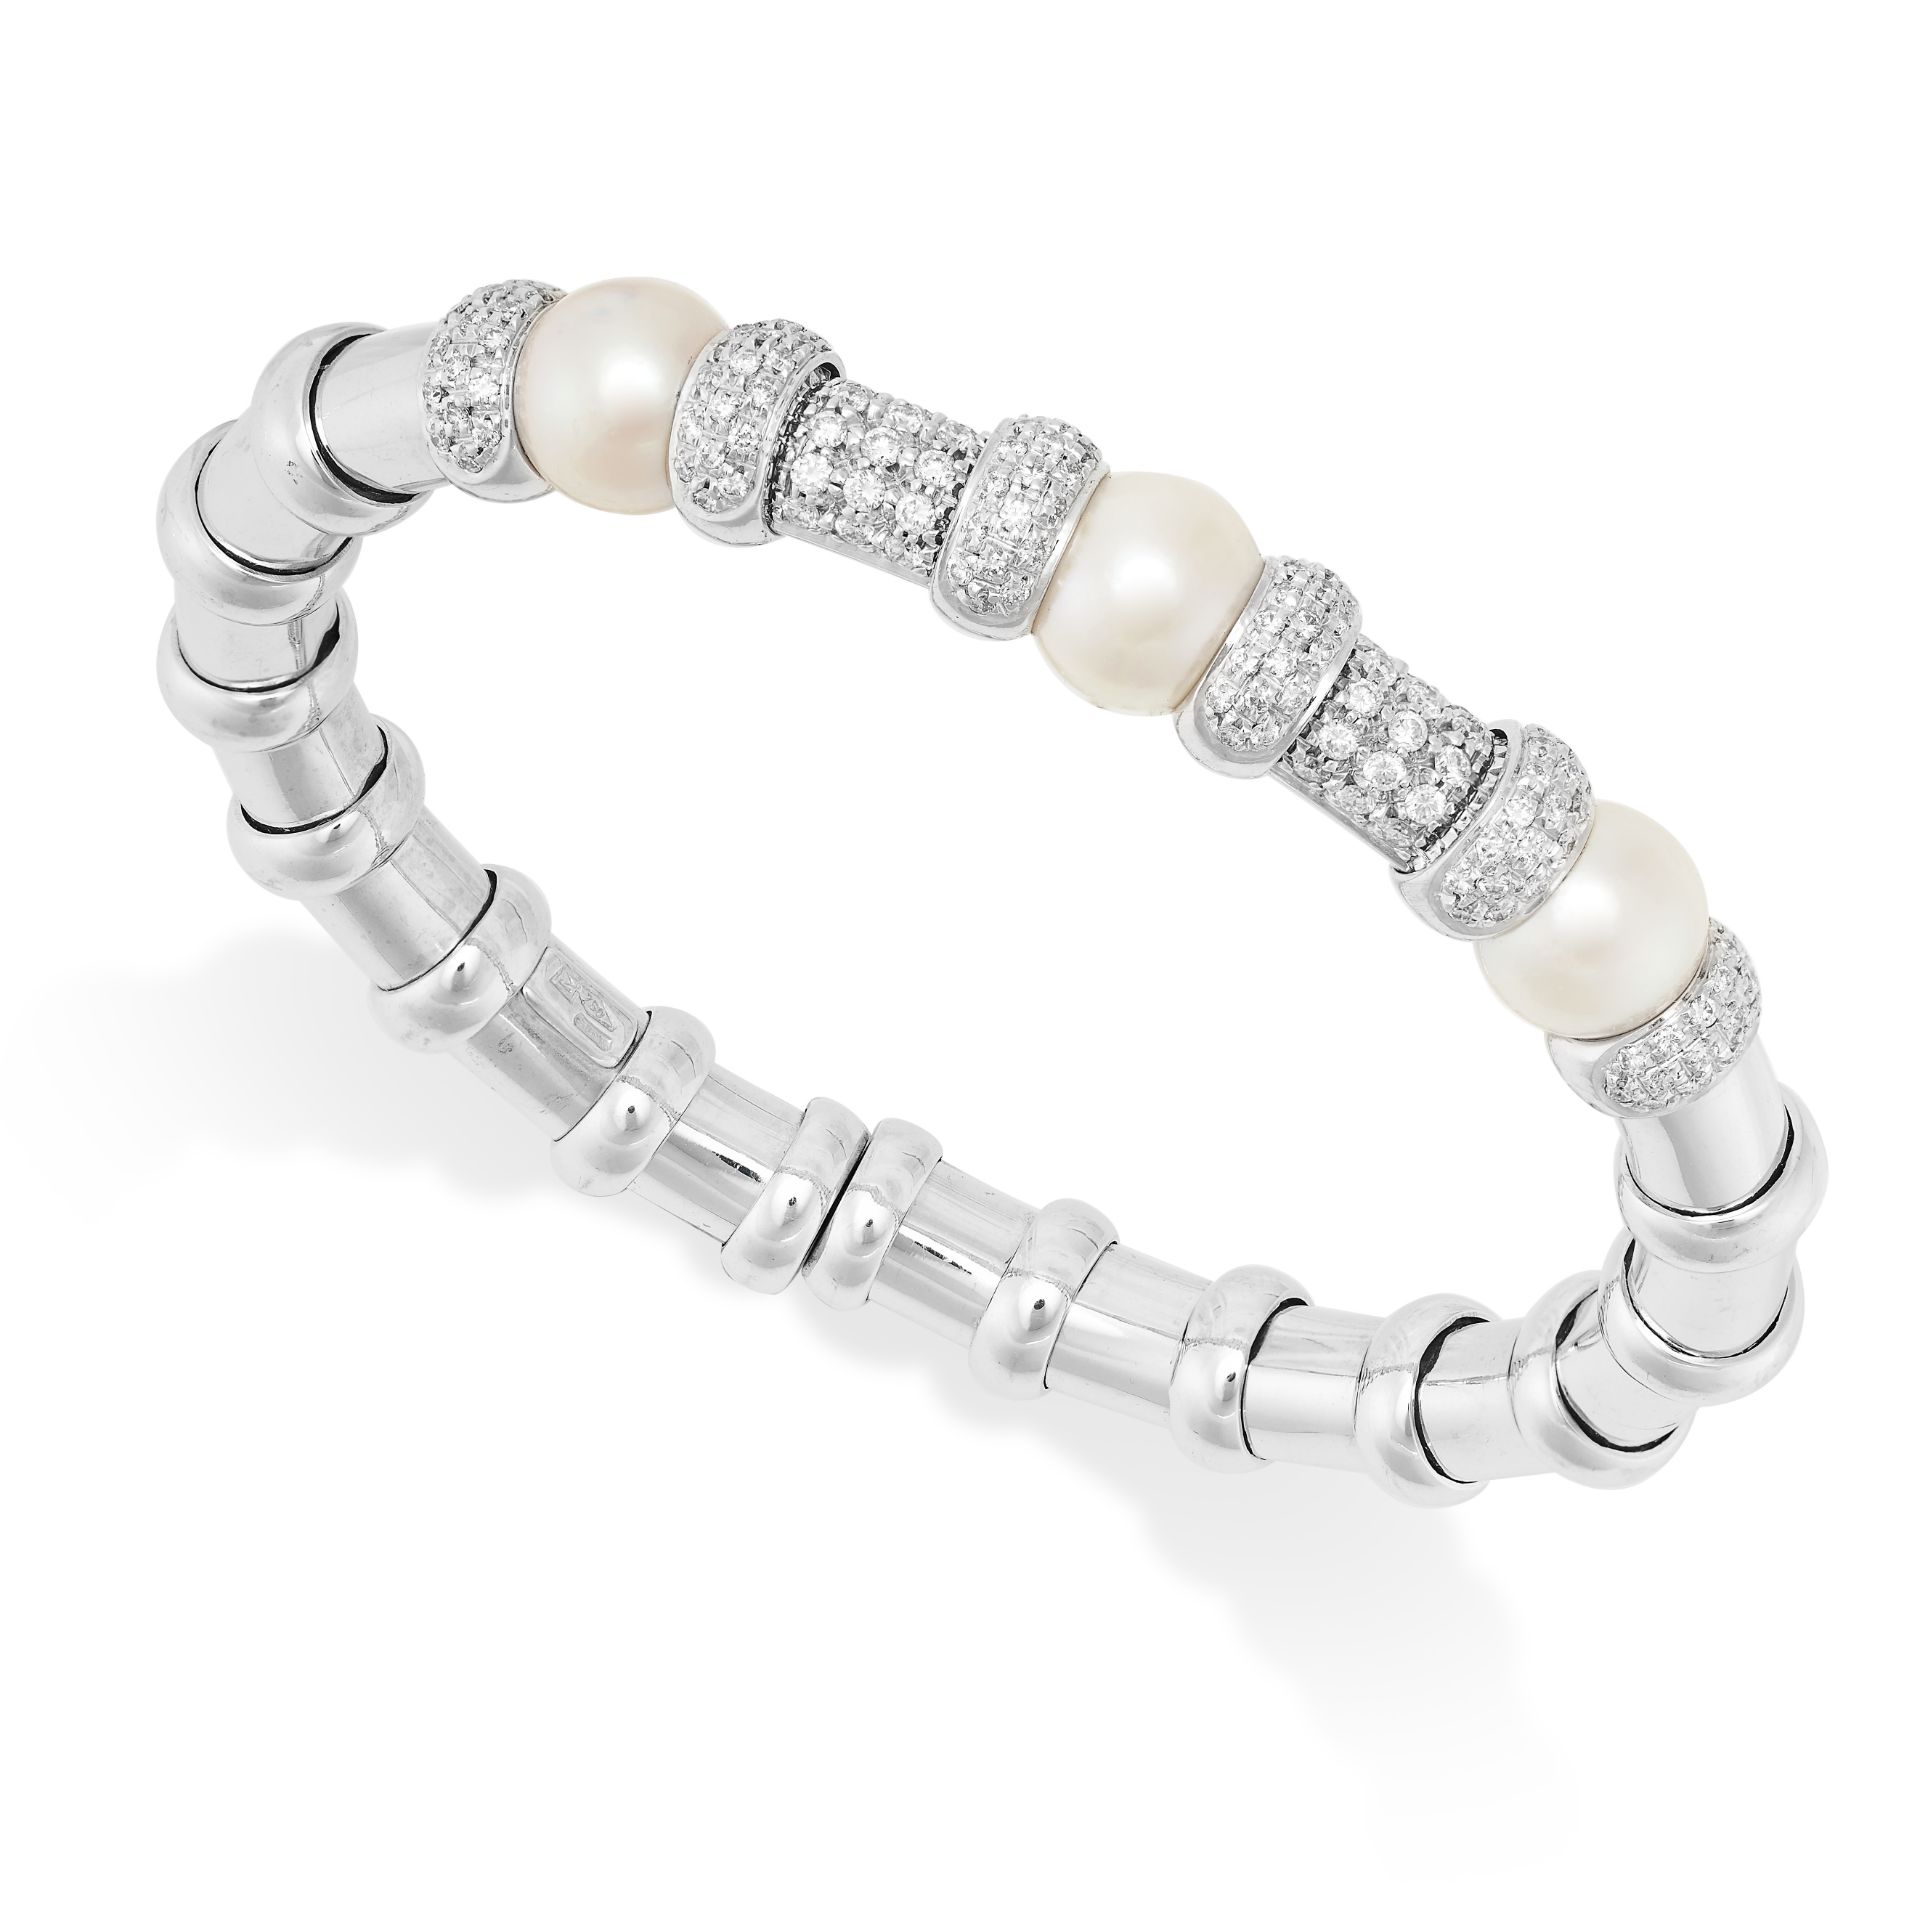 A PEARL AND DIAMOND BANGLE in 18ct white gold, the flexible bracelet part set with round cut